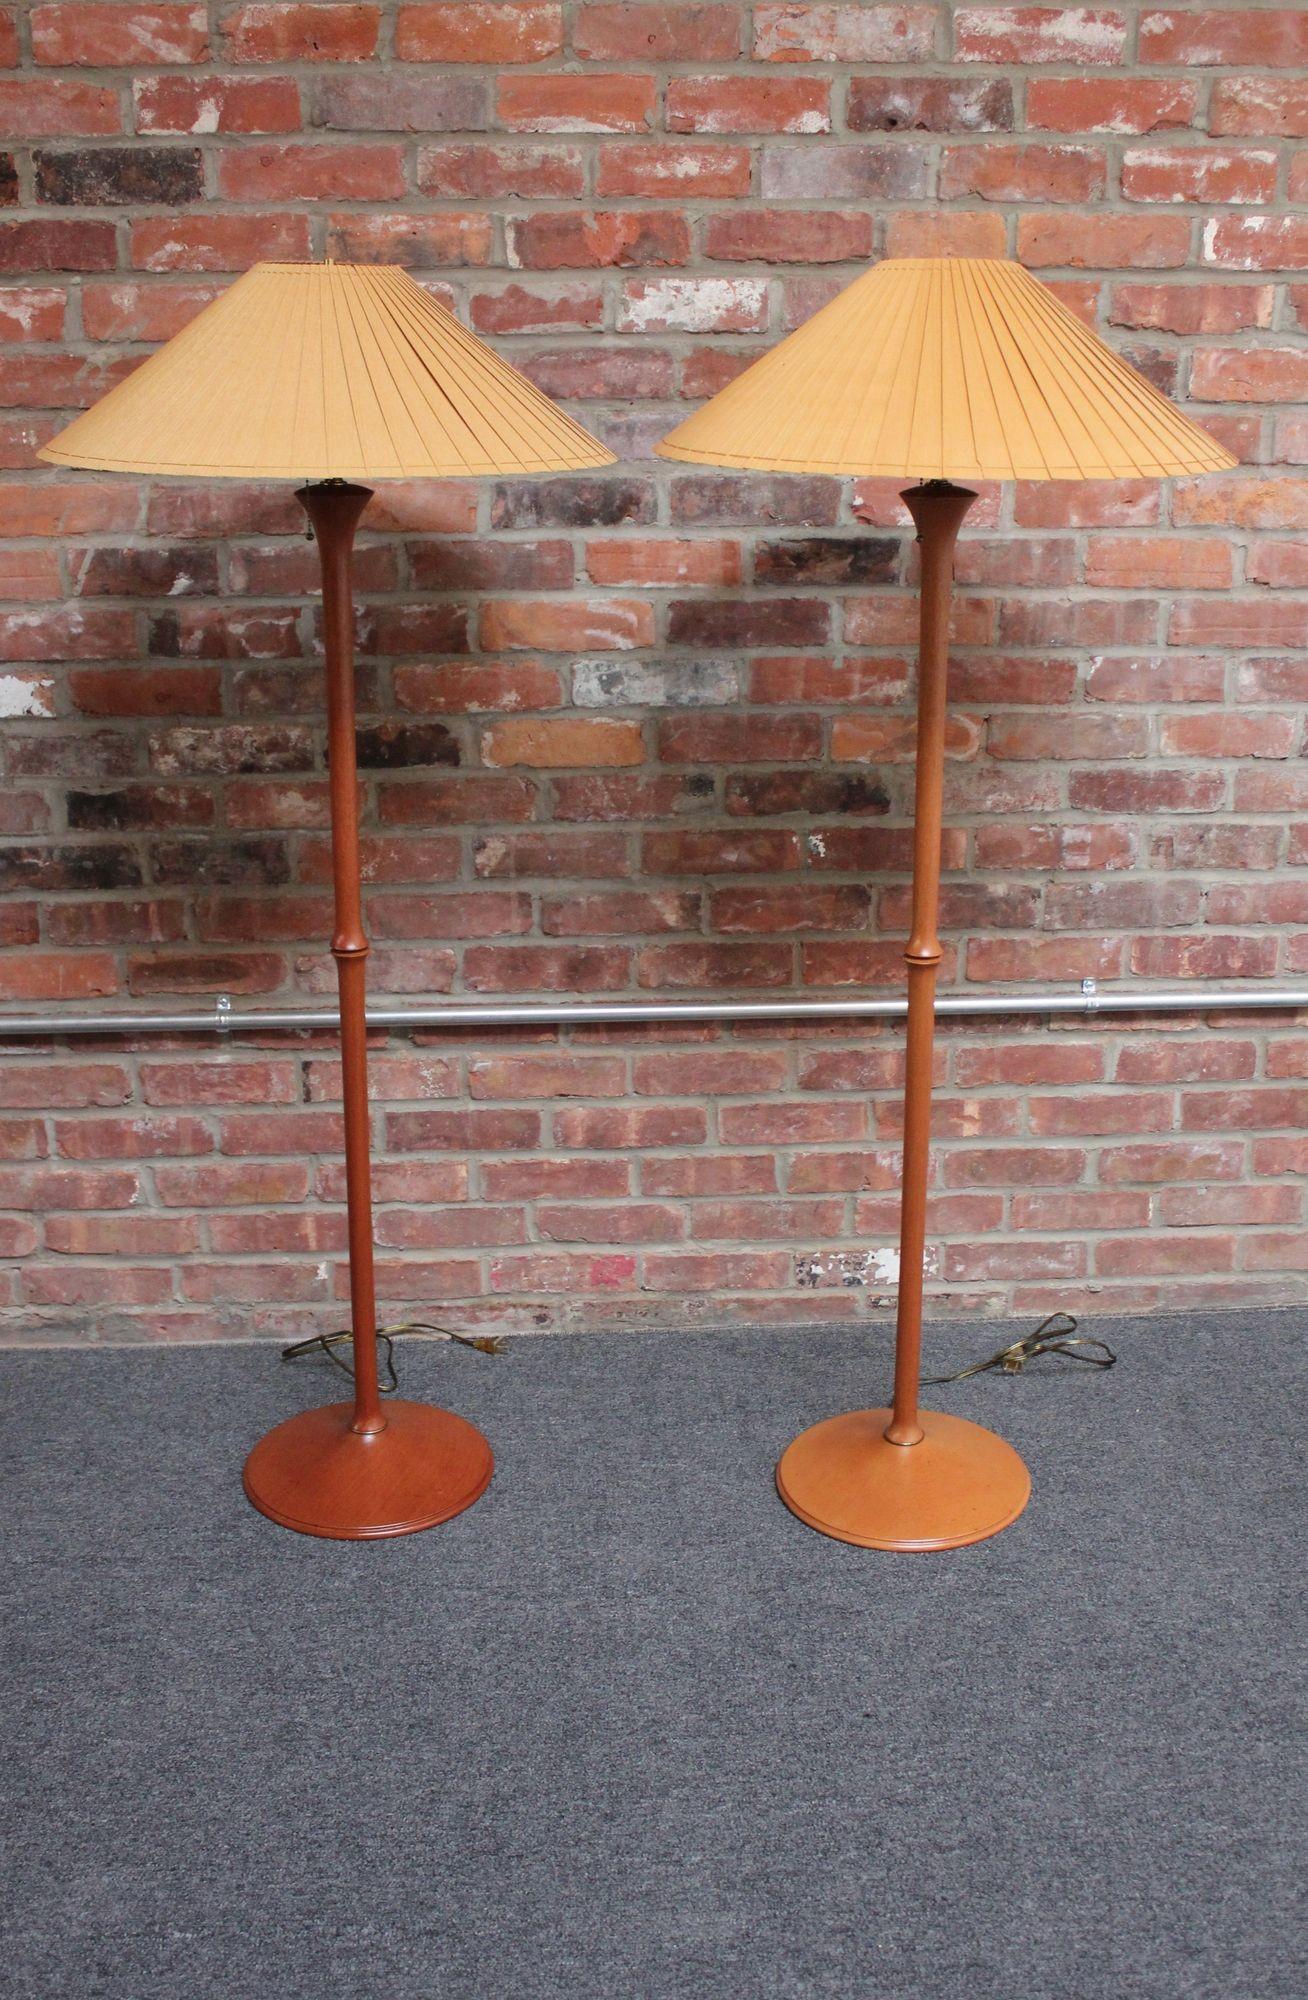 Pair of sculptural cherrywood floor lamps with brass accents and original paper shades (Vermont, USA, 1995).
Each lamp has a double-socket accommodating two bulbs with two on/off pull-string switches and has been newly rewired.
Excellent, vintage